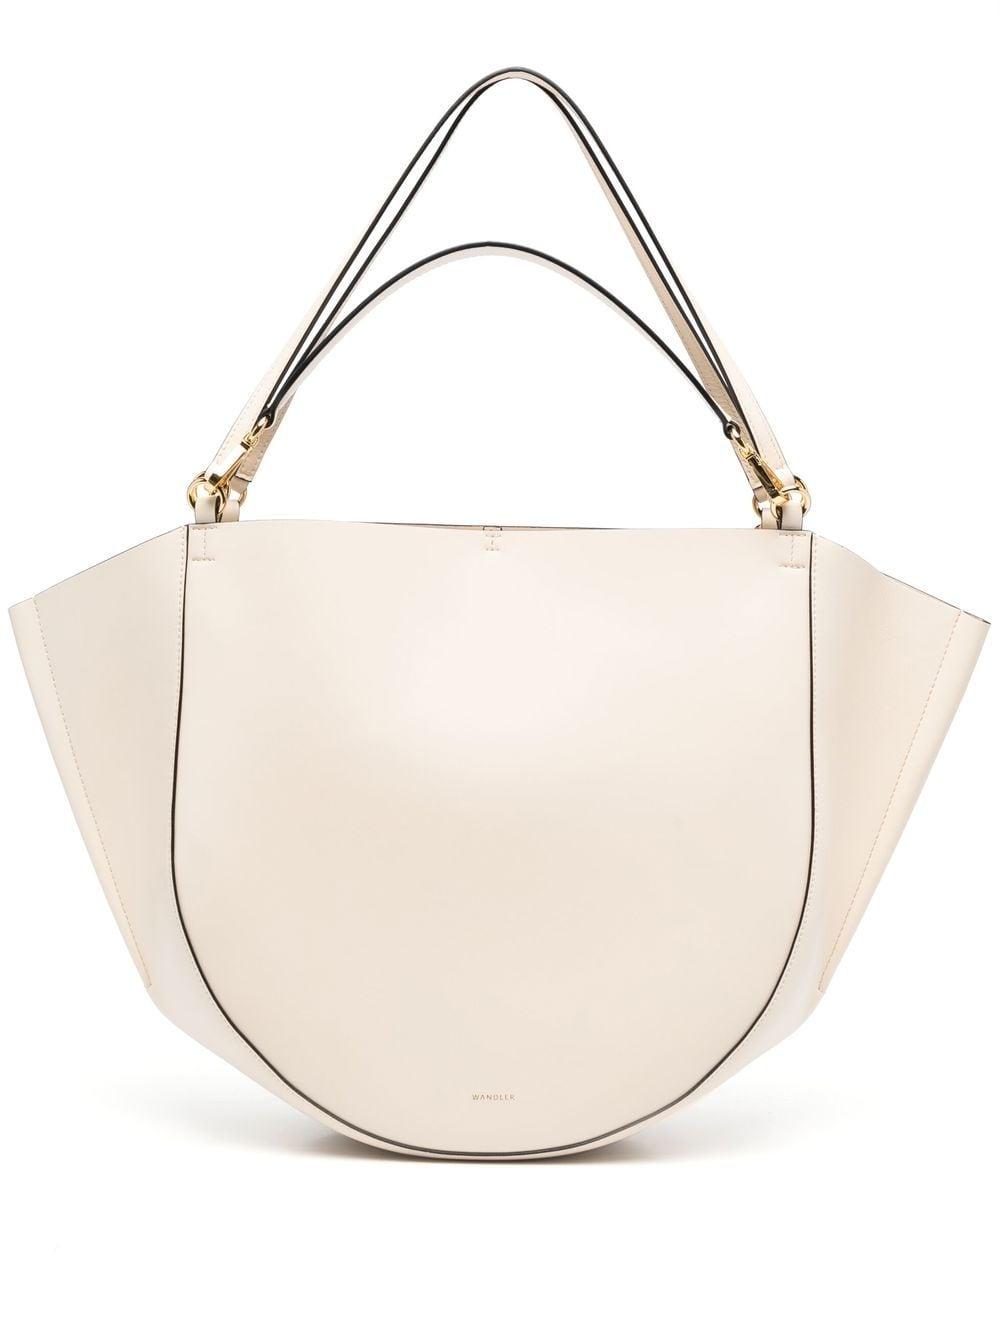 Wandler Open-top Leather Tote Bag in White | Lyst UK